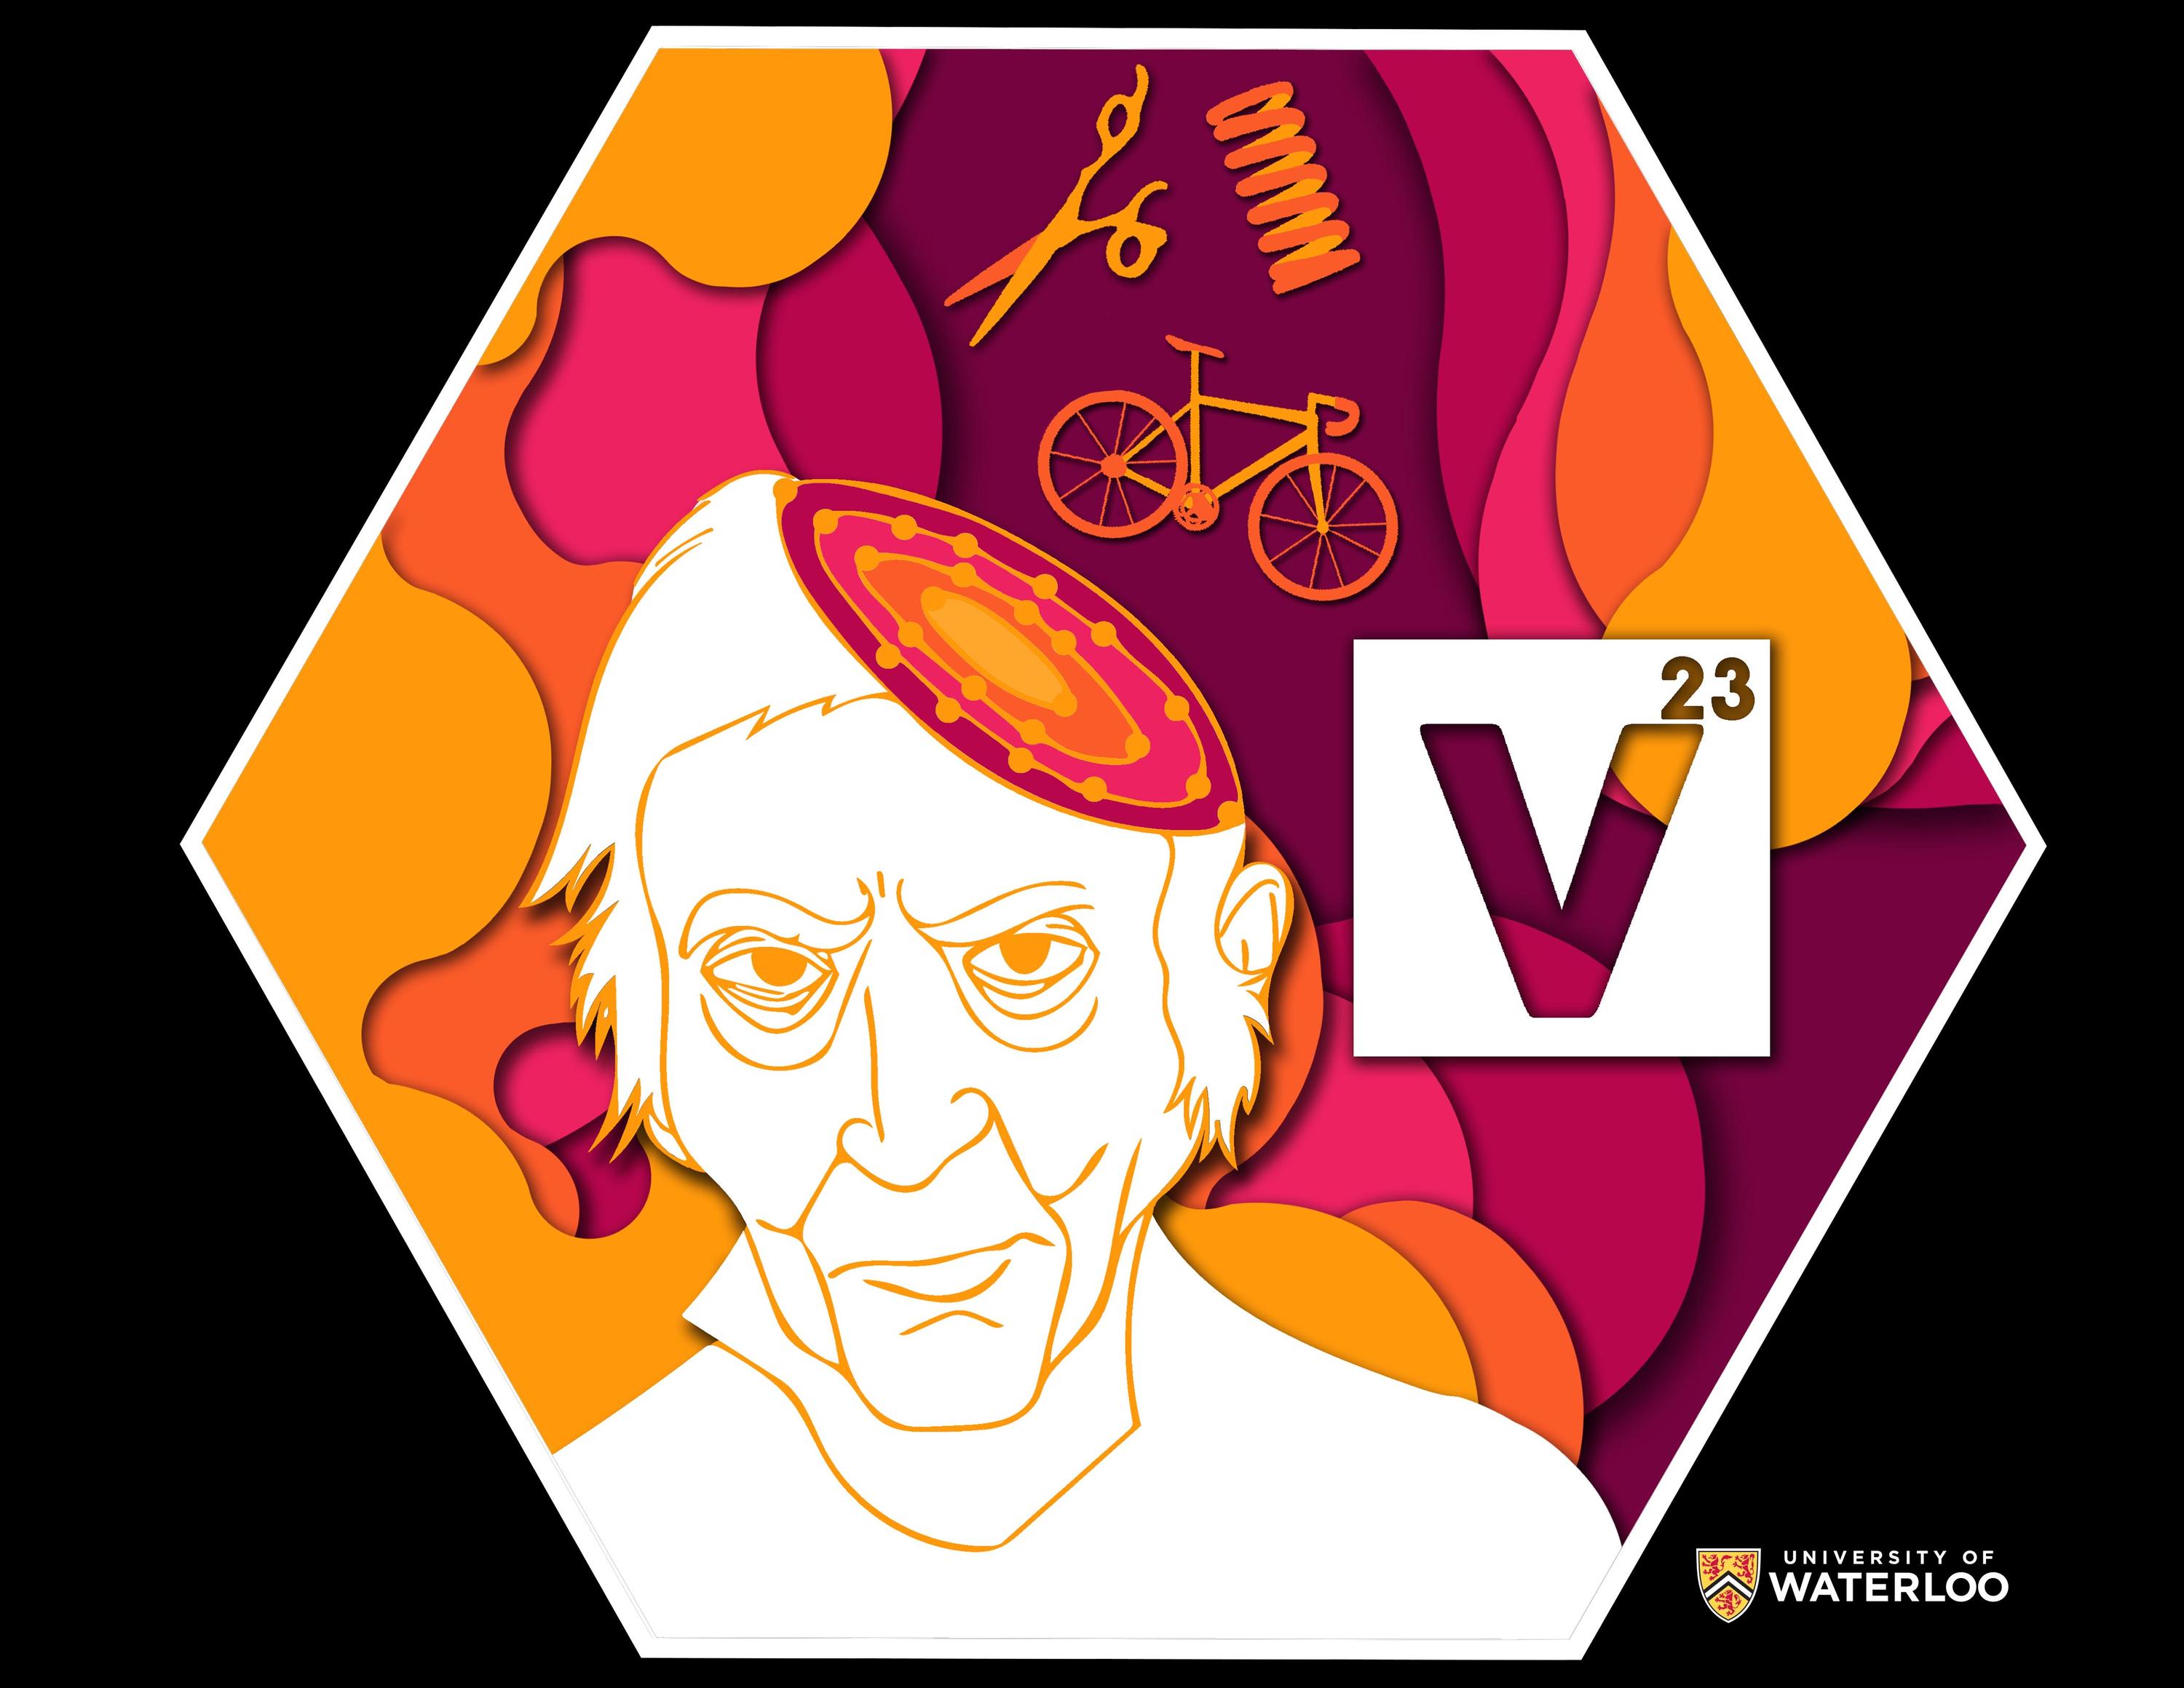 Digital image. Portrait of Andrés Manuel del Río Fernández in white left with a section of his brain exposed to reveal an atomic Bohr model. A bicycle, scissors and spring appear above on top of a colorful background of oranges, pinks and reds. To the right is a white periodic table tile with a chemical symbol “V” and atomic number “23”.